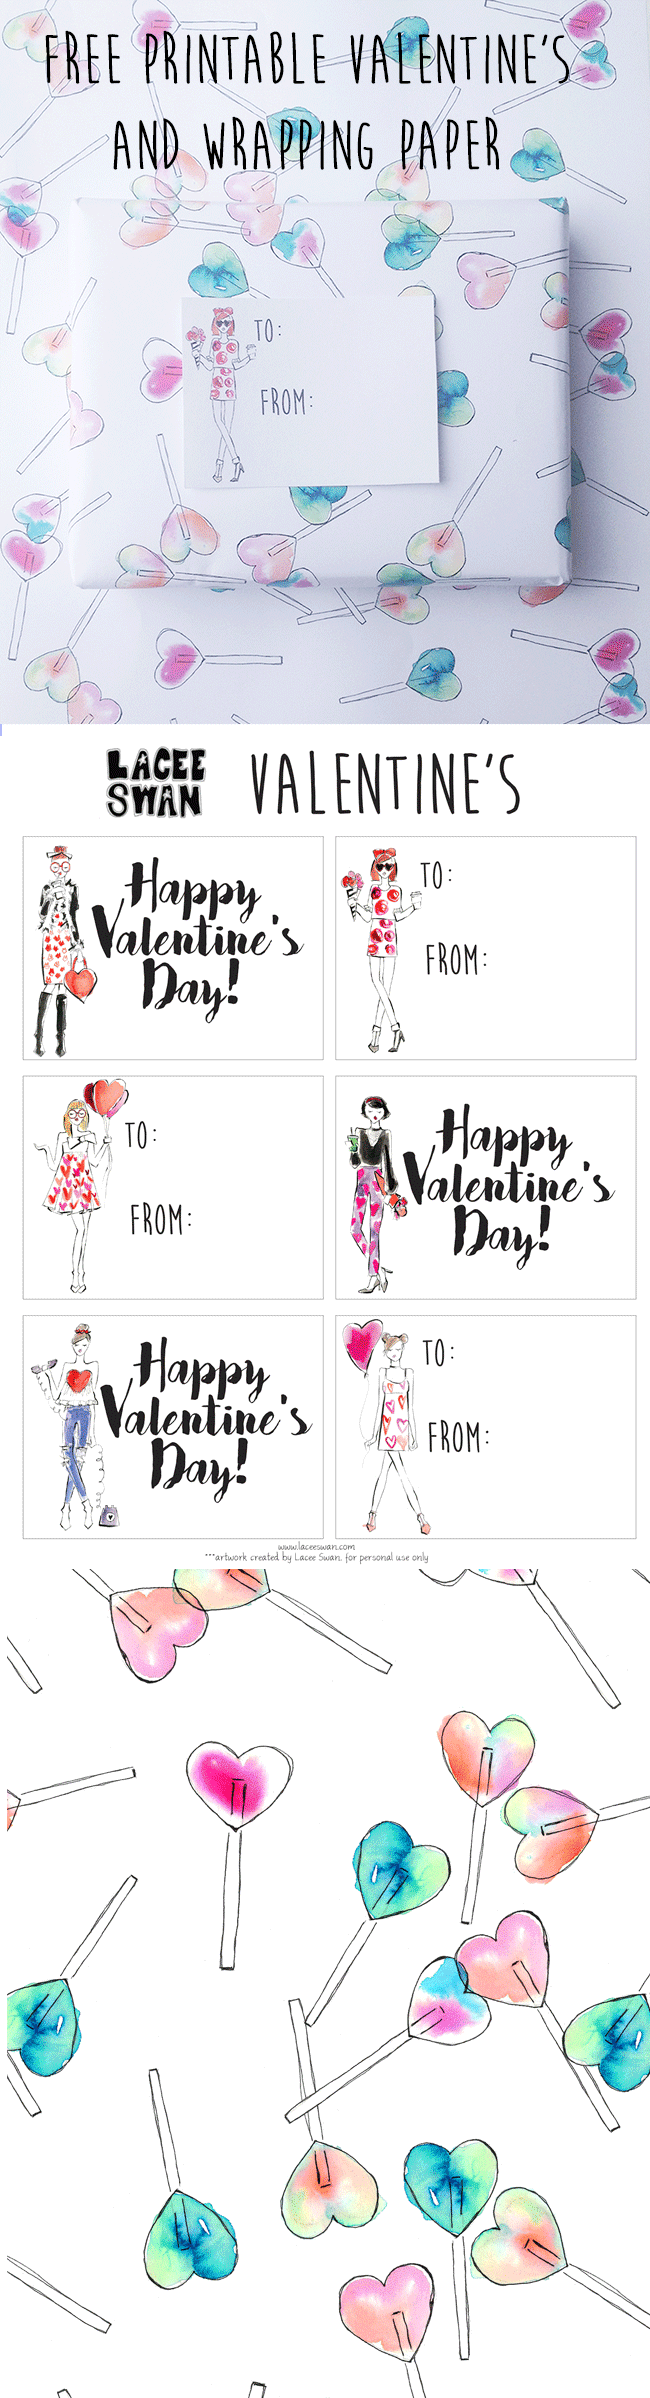 free-printable-valentine-s-wrapping-paper-lacee-swanlacee-swan